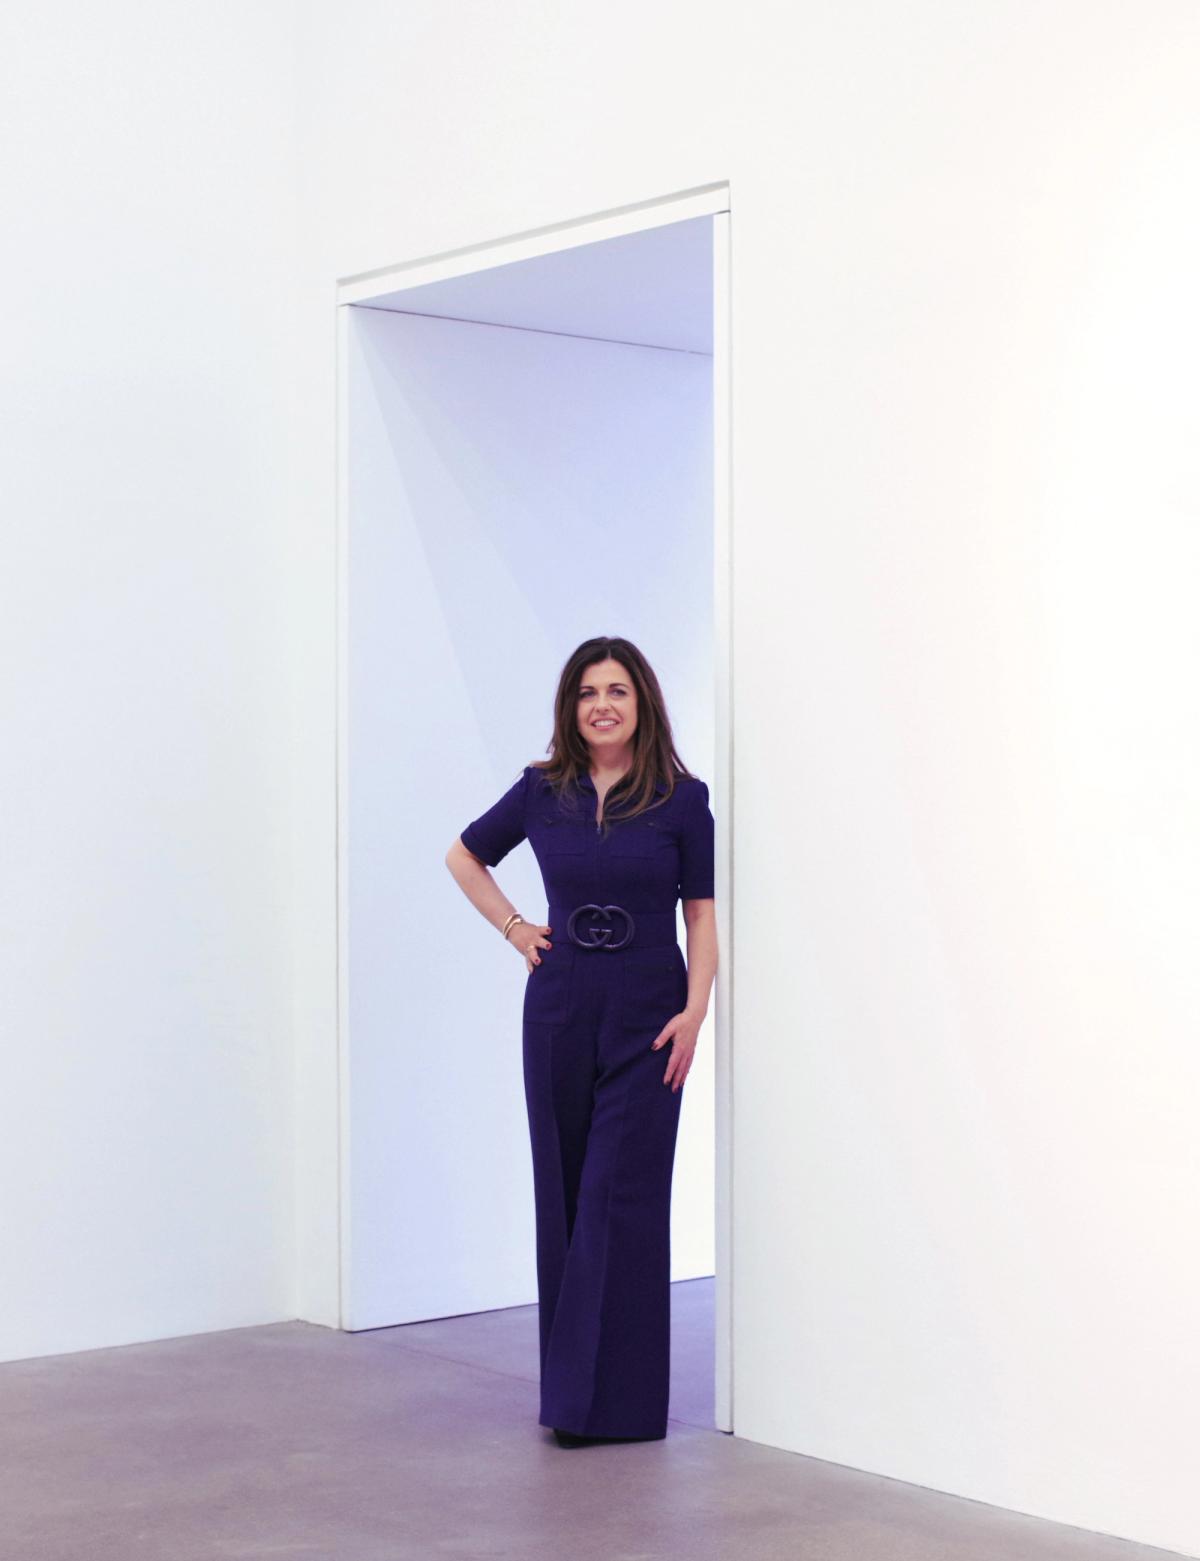 Alison Jacques will open a new gallery in Mayfair this autumn

Photo: Hannah Starkey